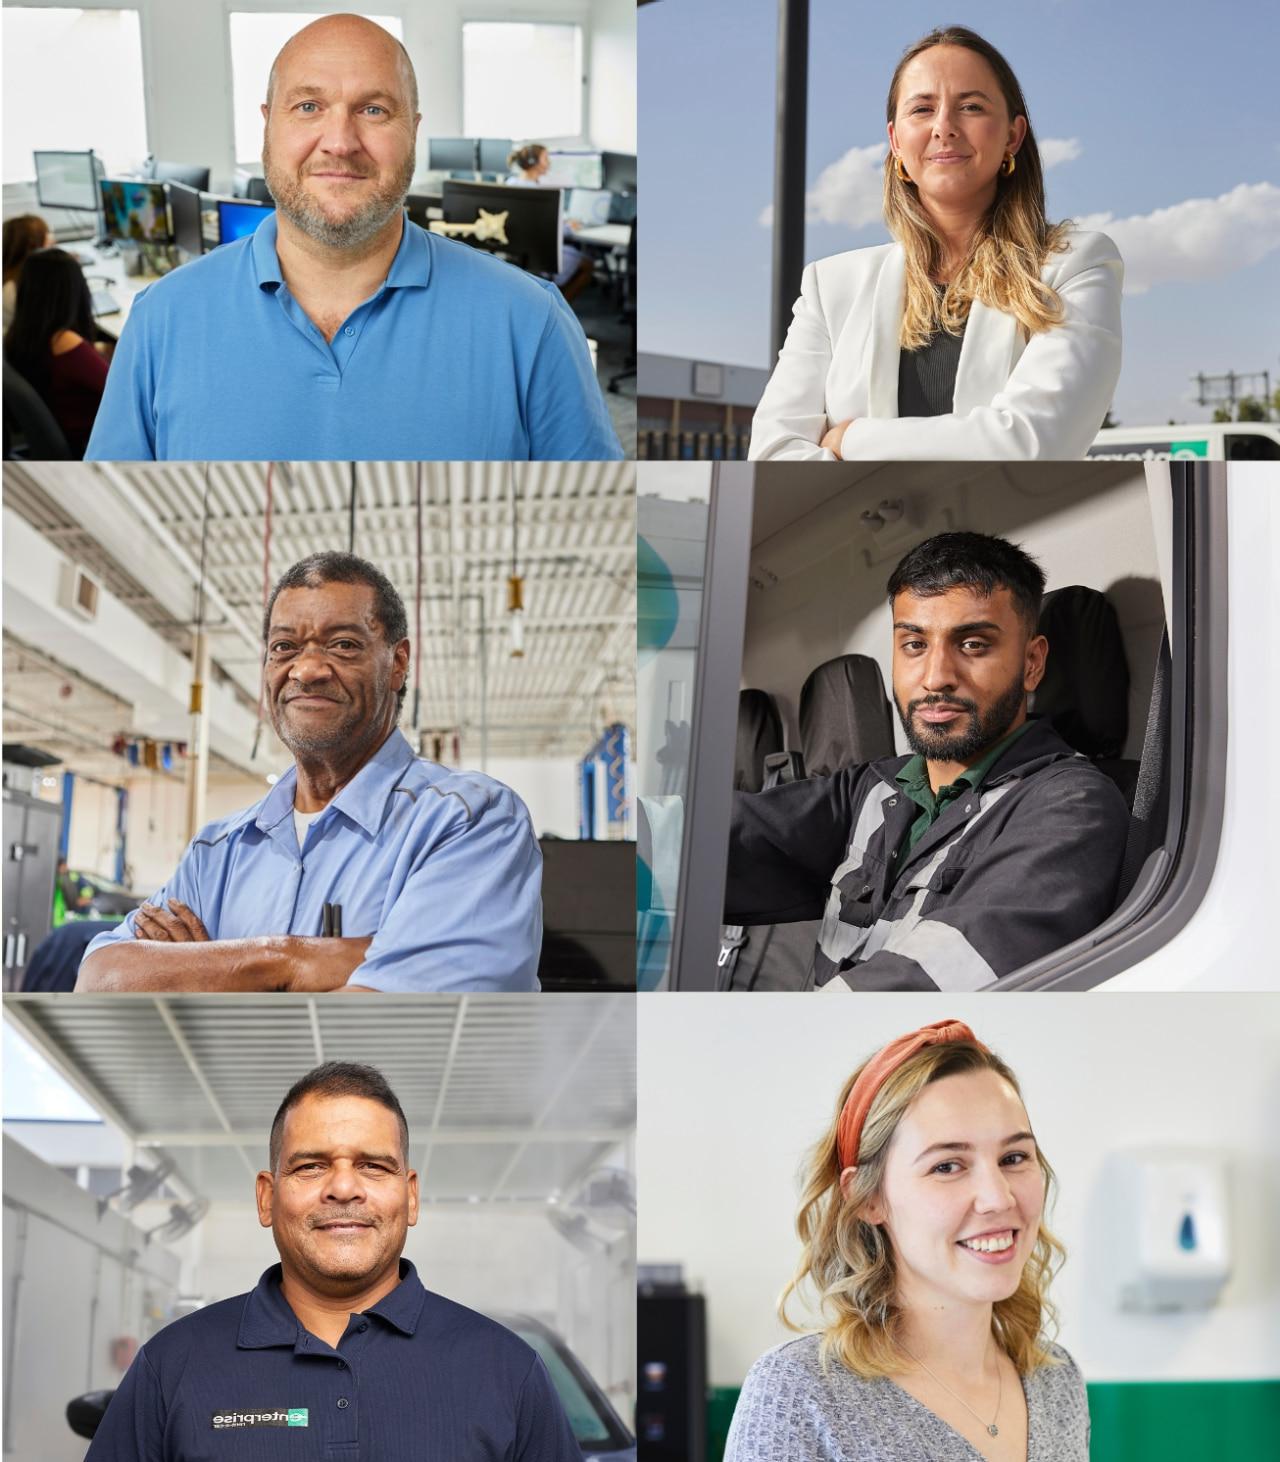 Nine different Enterprise employees, representing a wide range of diversity (gender, race, ethnicity, geographic, etc.), are arranged in a carousel image.